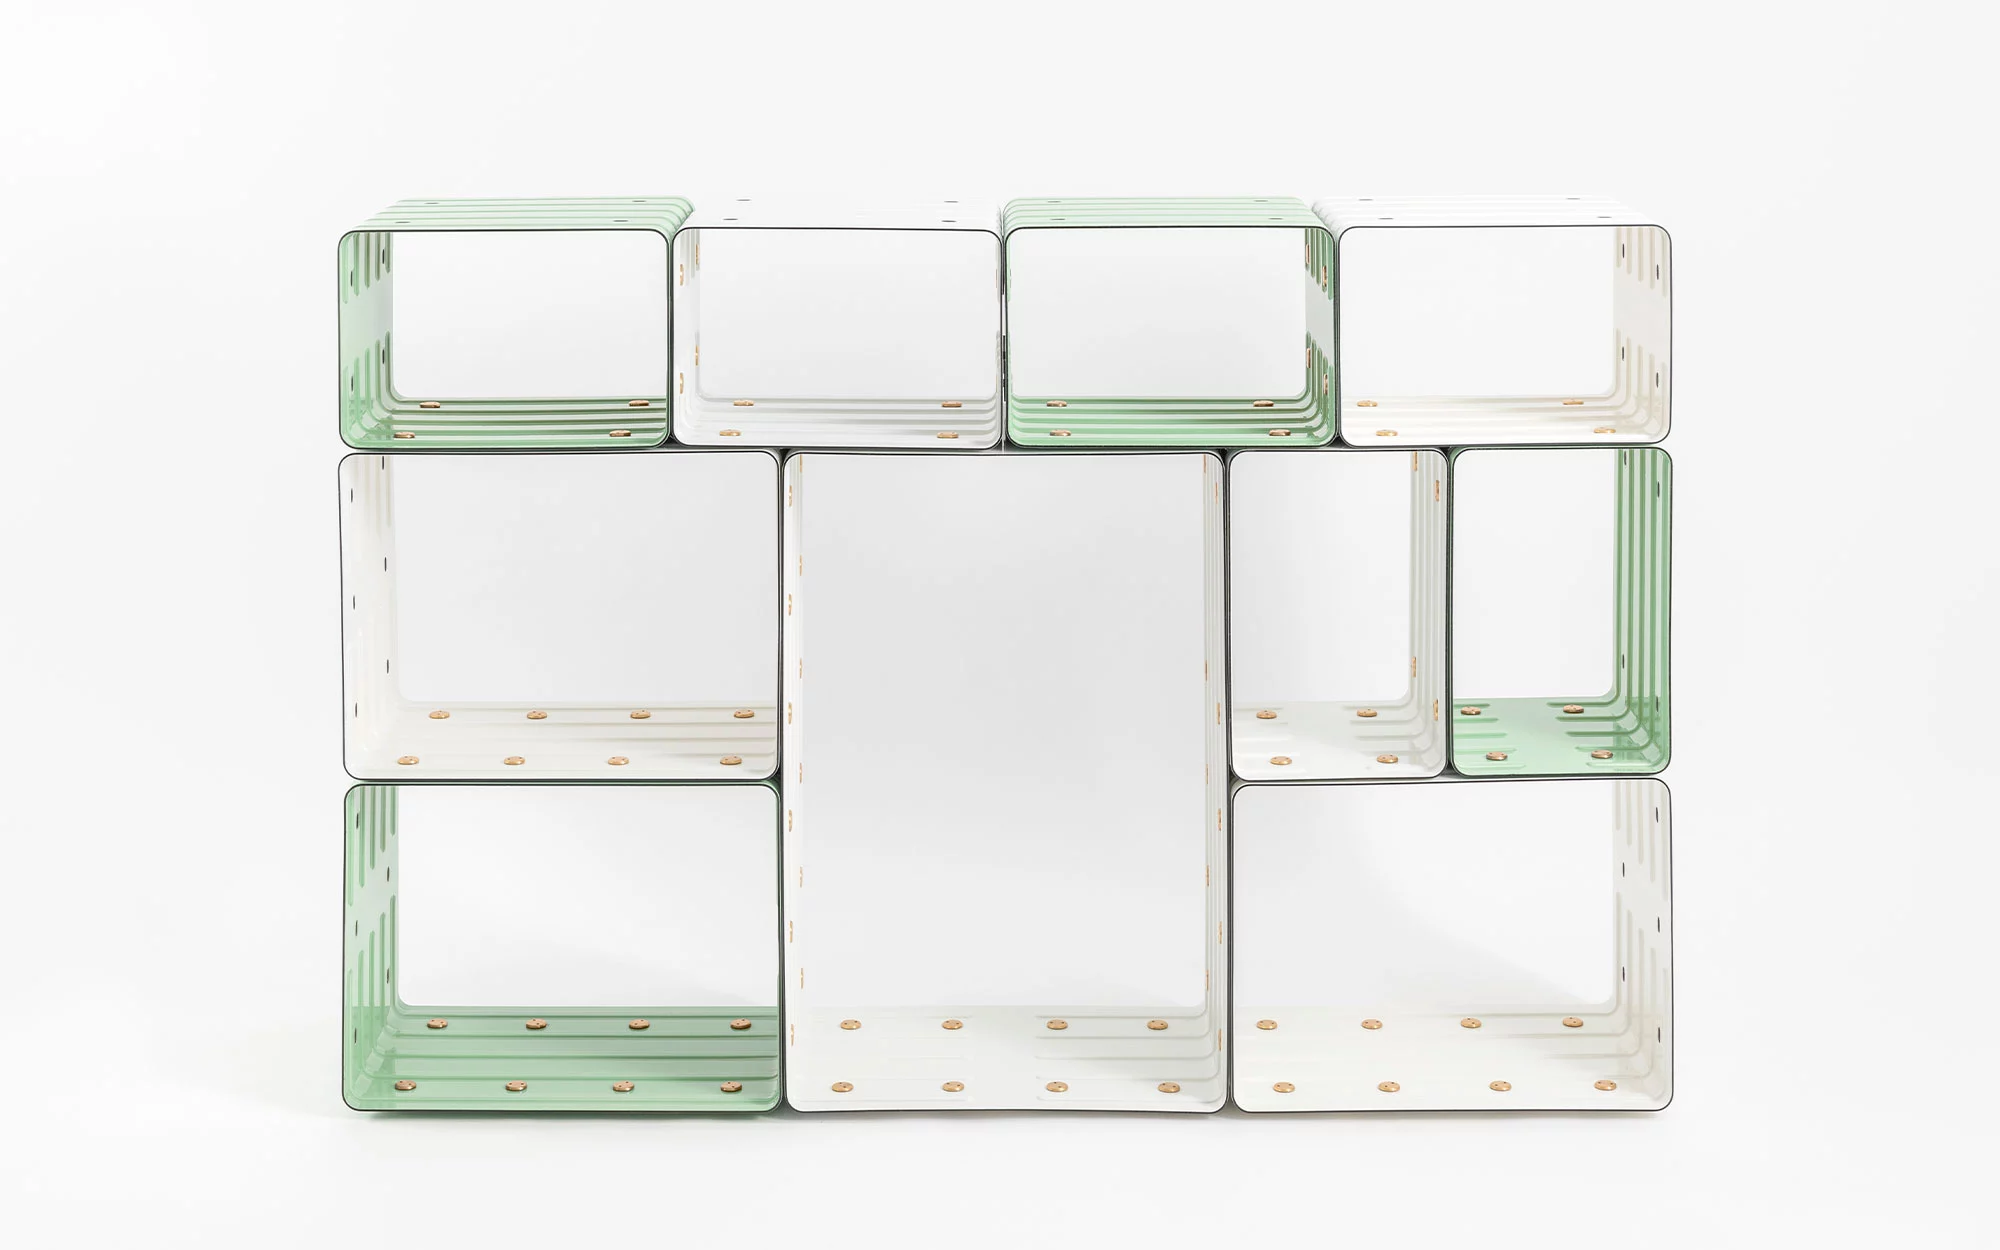 Quobus 1,3,6 two-colored - Marc Newson - Storage - Galerie kreo